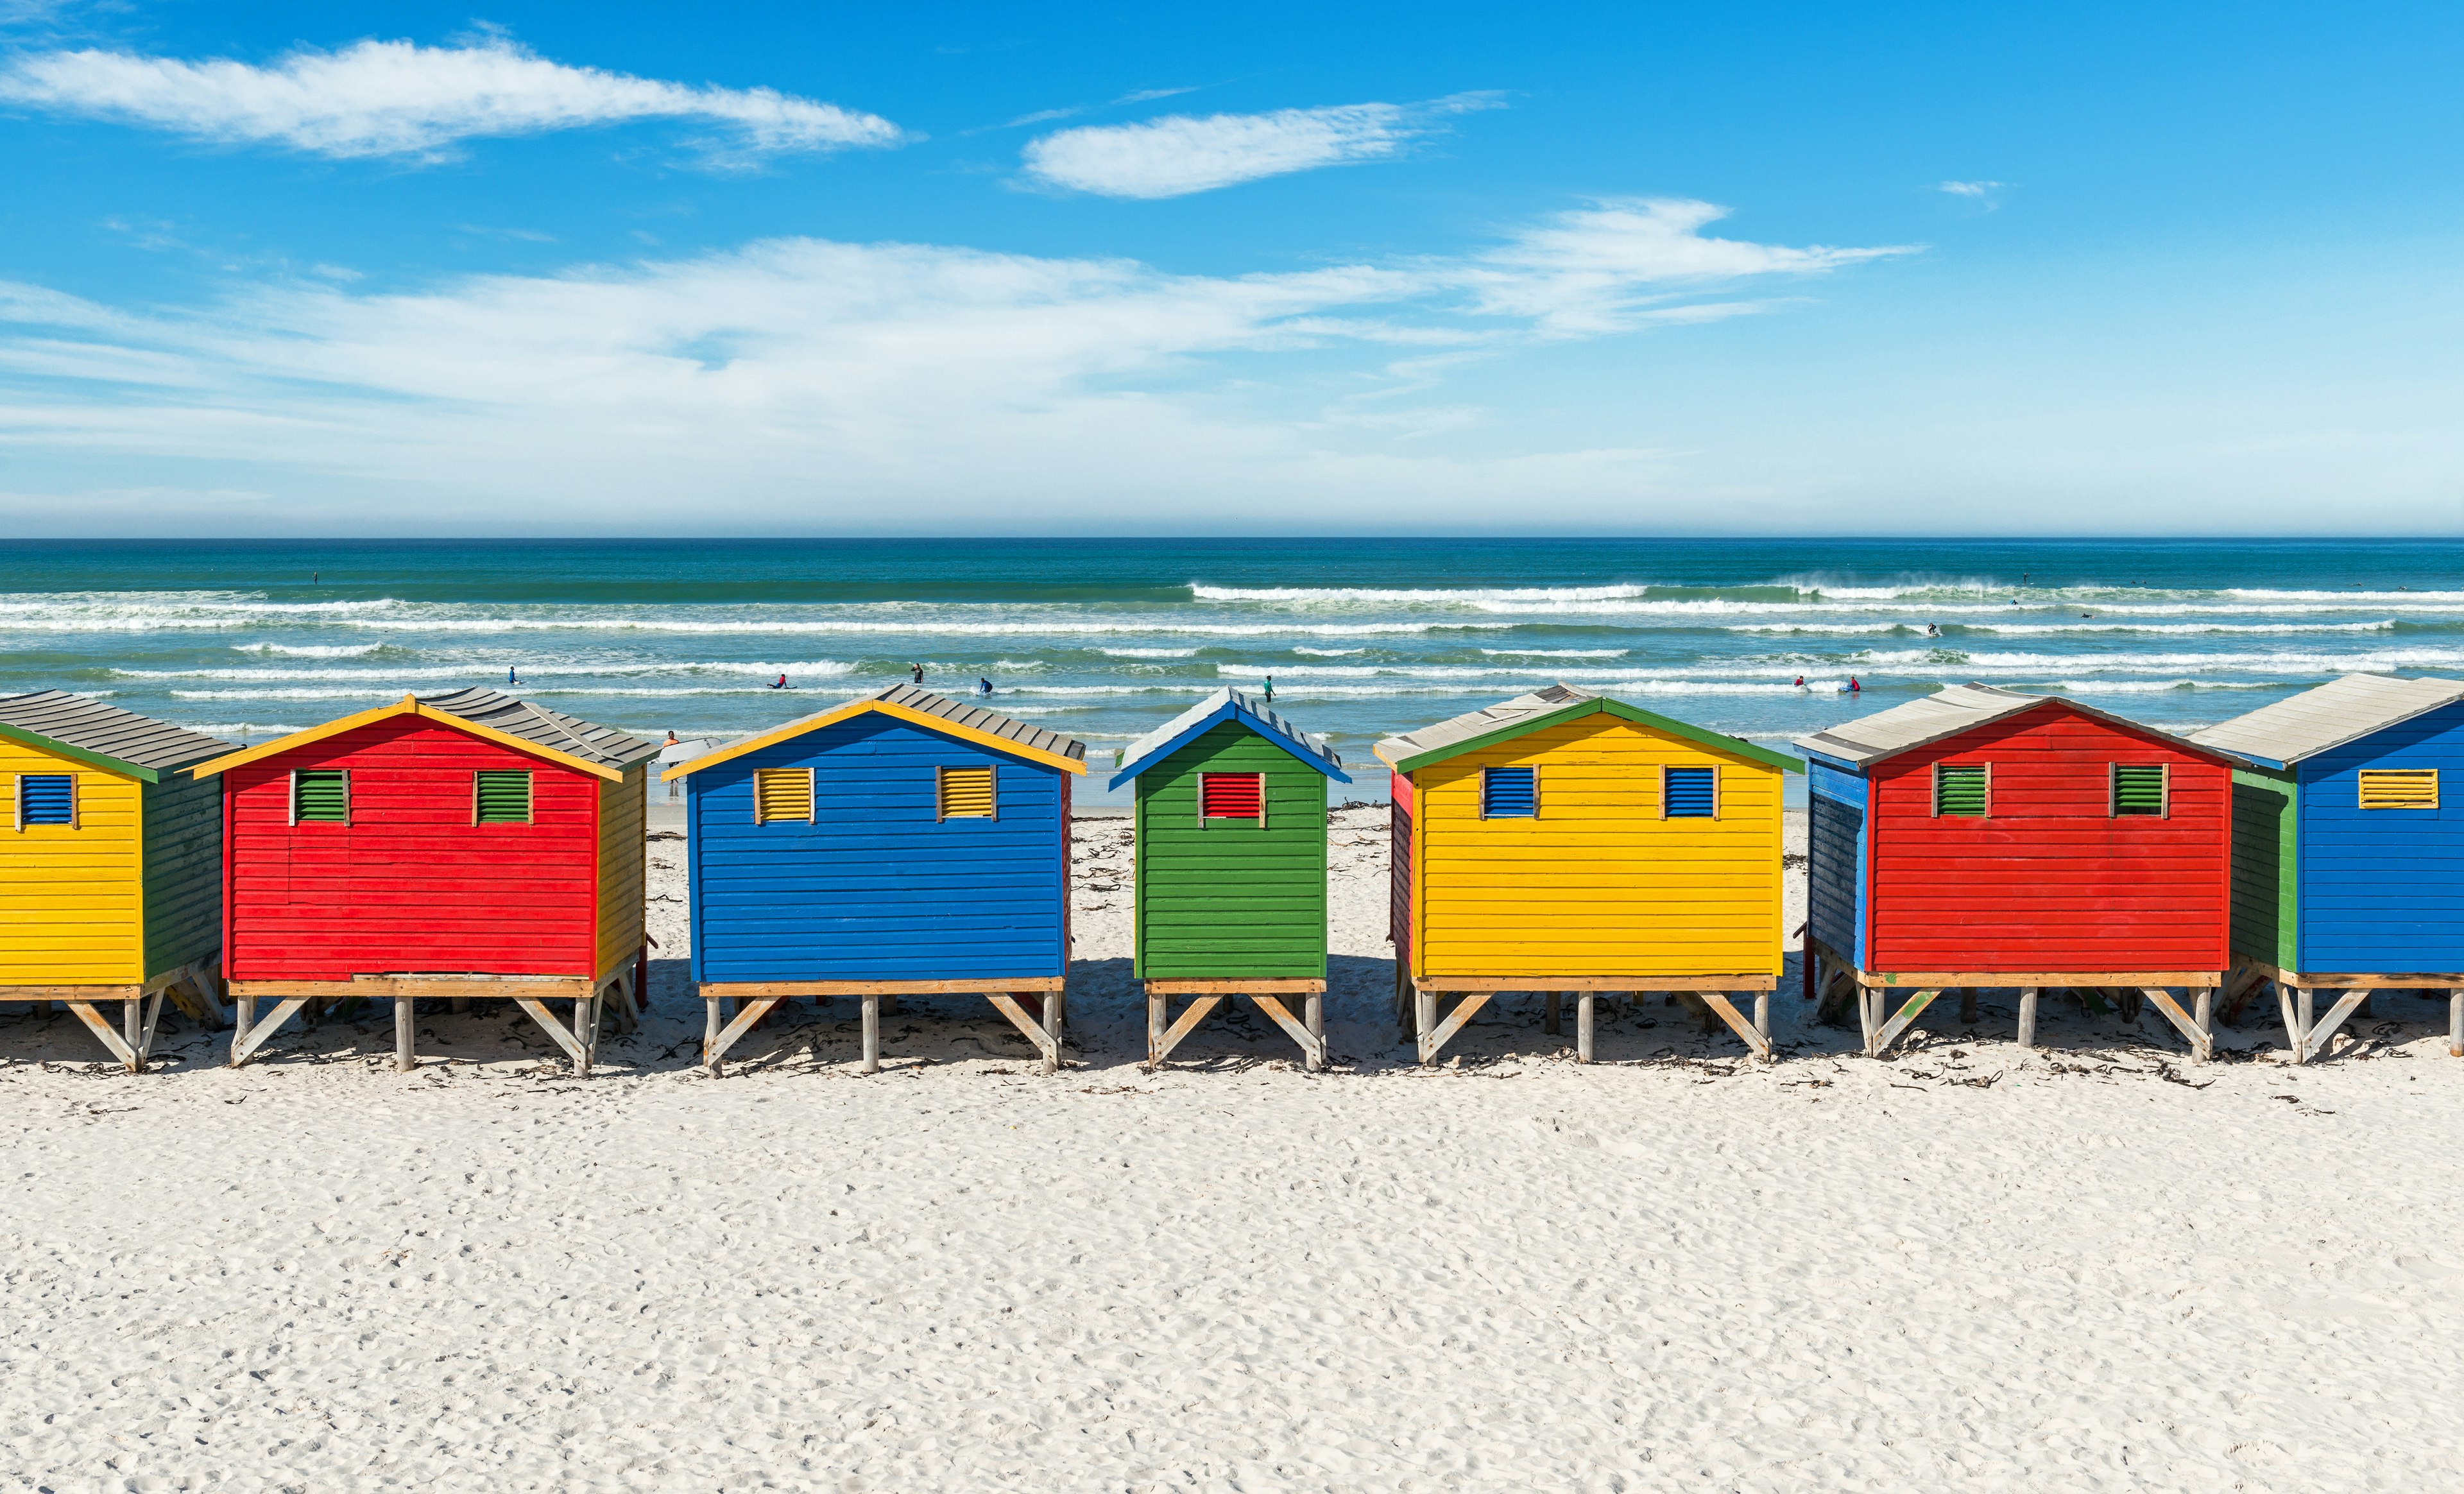 The famous beach of Muizenberg (also known as surfers paradise), with its colorful beach boxes.